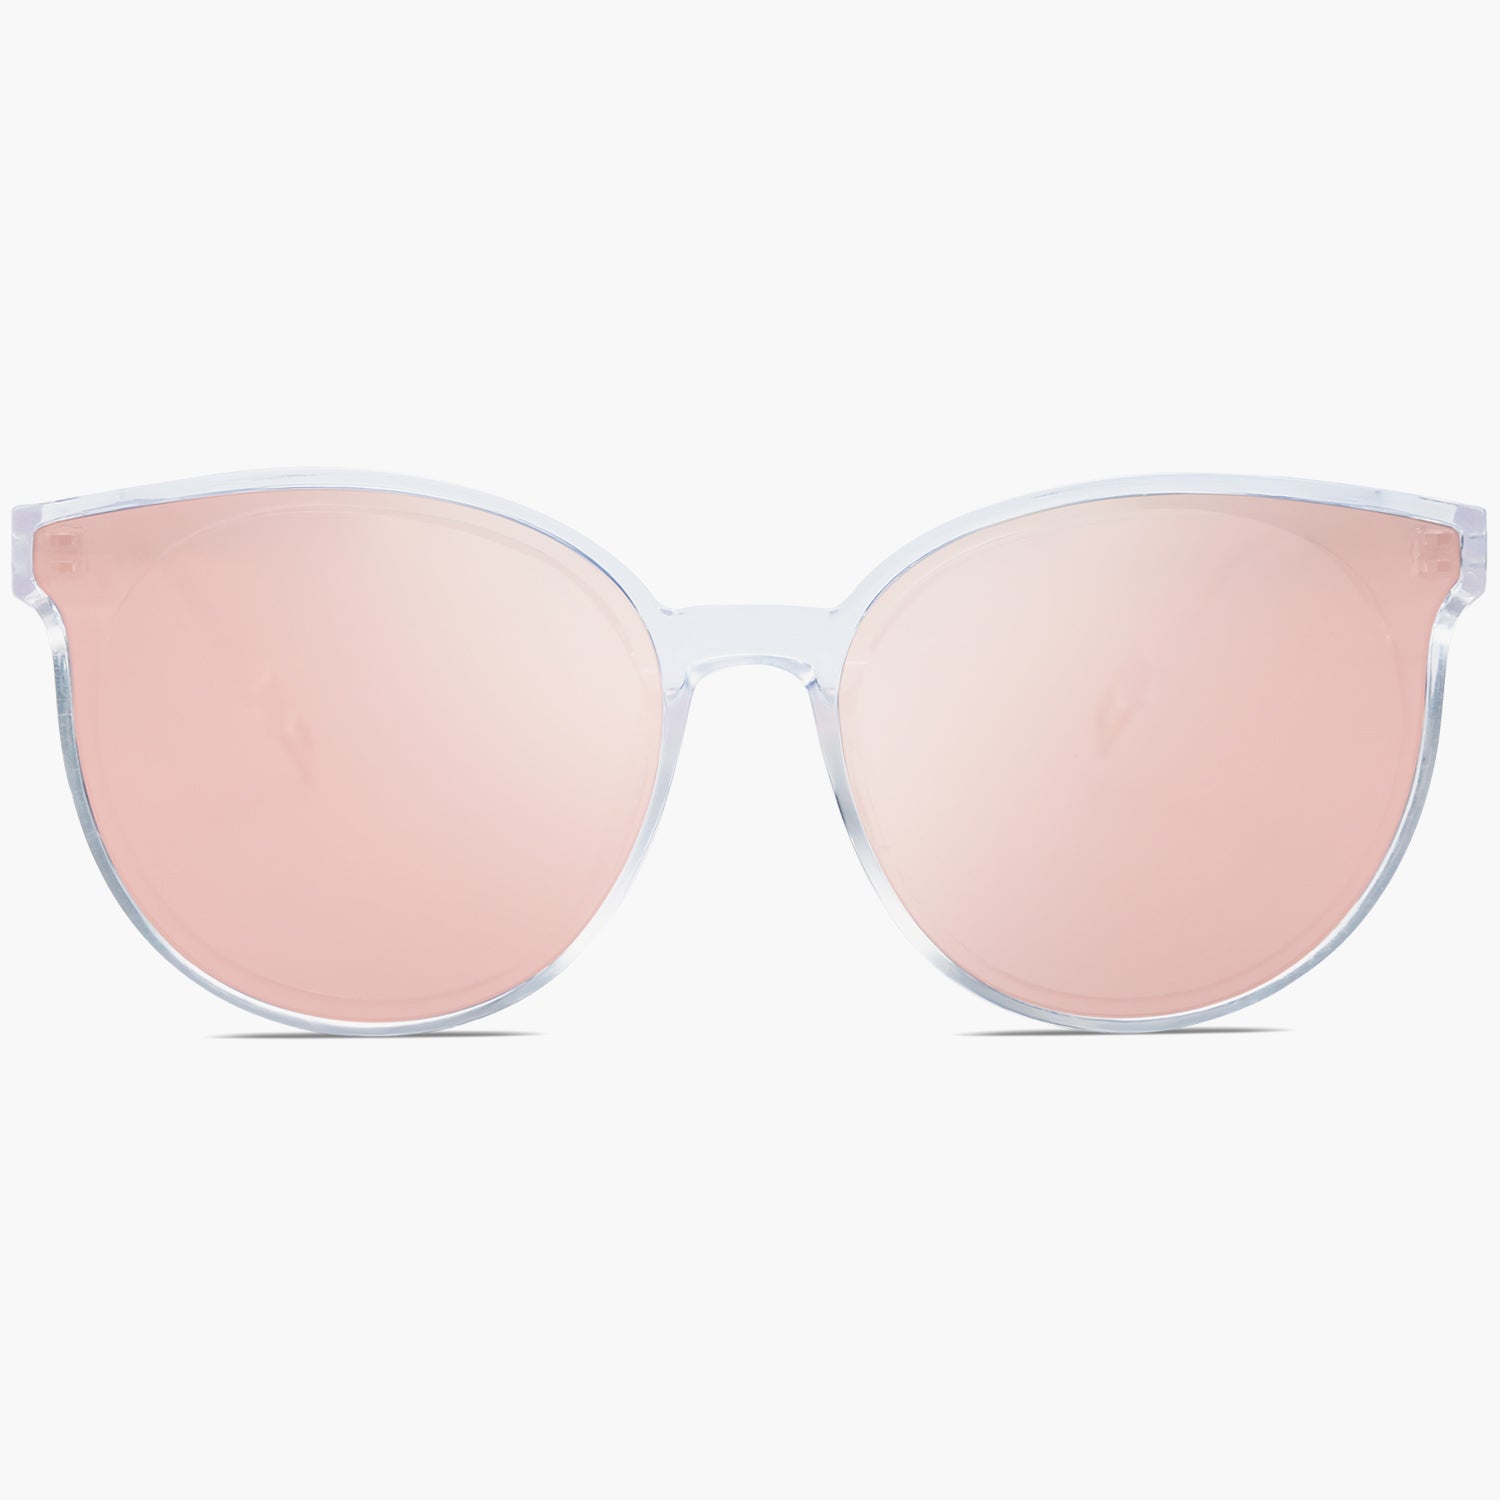 Buy Mirrored Cat Eye Sunglasses for Women | Together | SOJOS